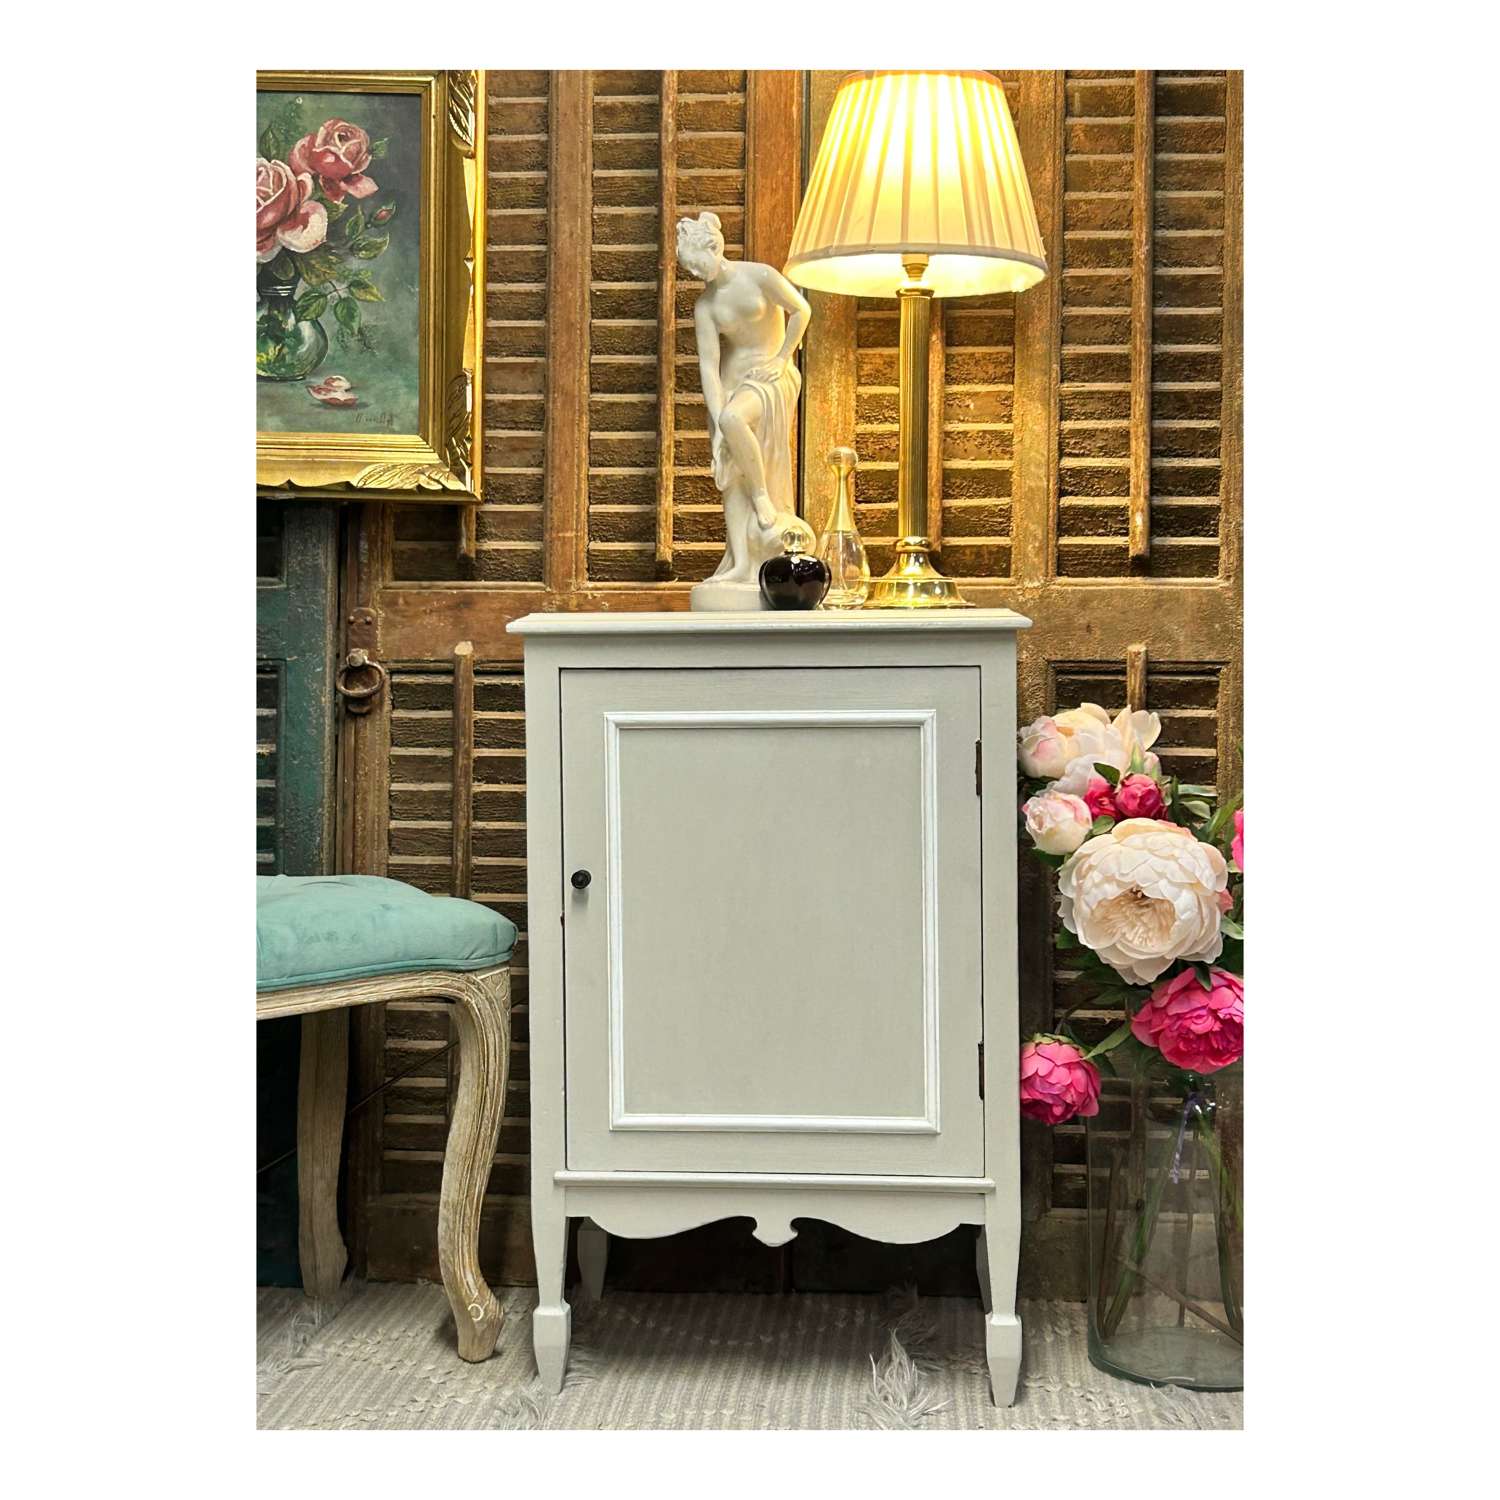 Antique Painted Small Cabinet or Bedside Table